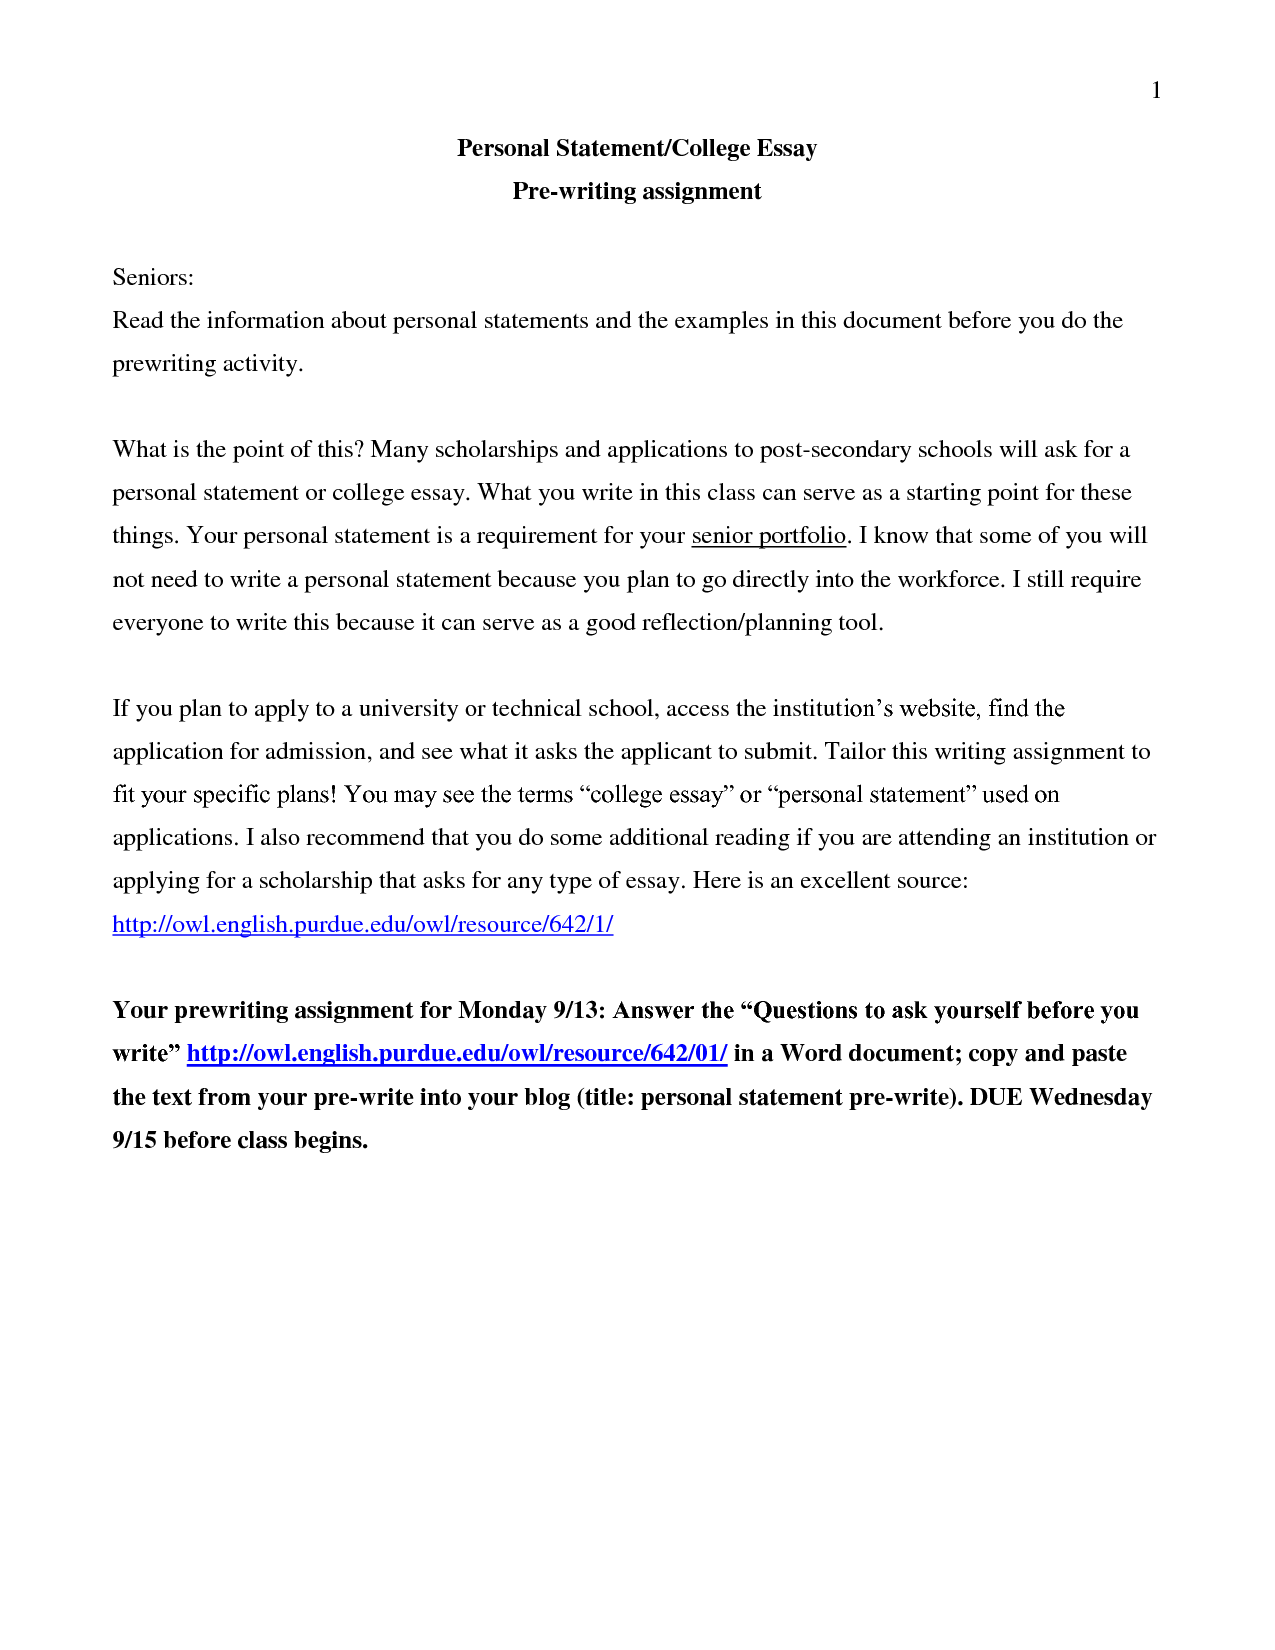 Personal statement essay for scholarships